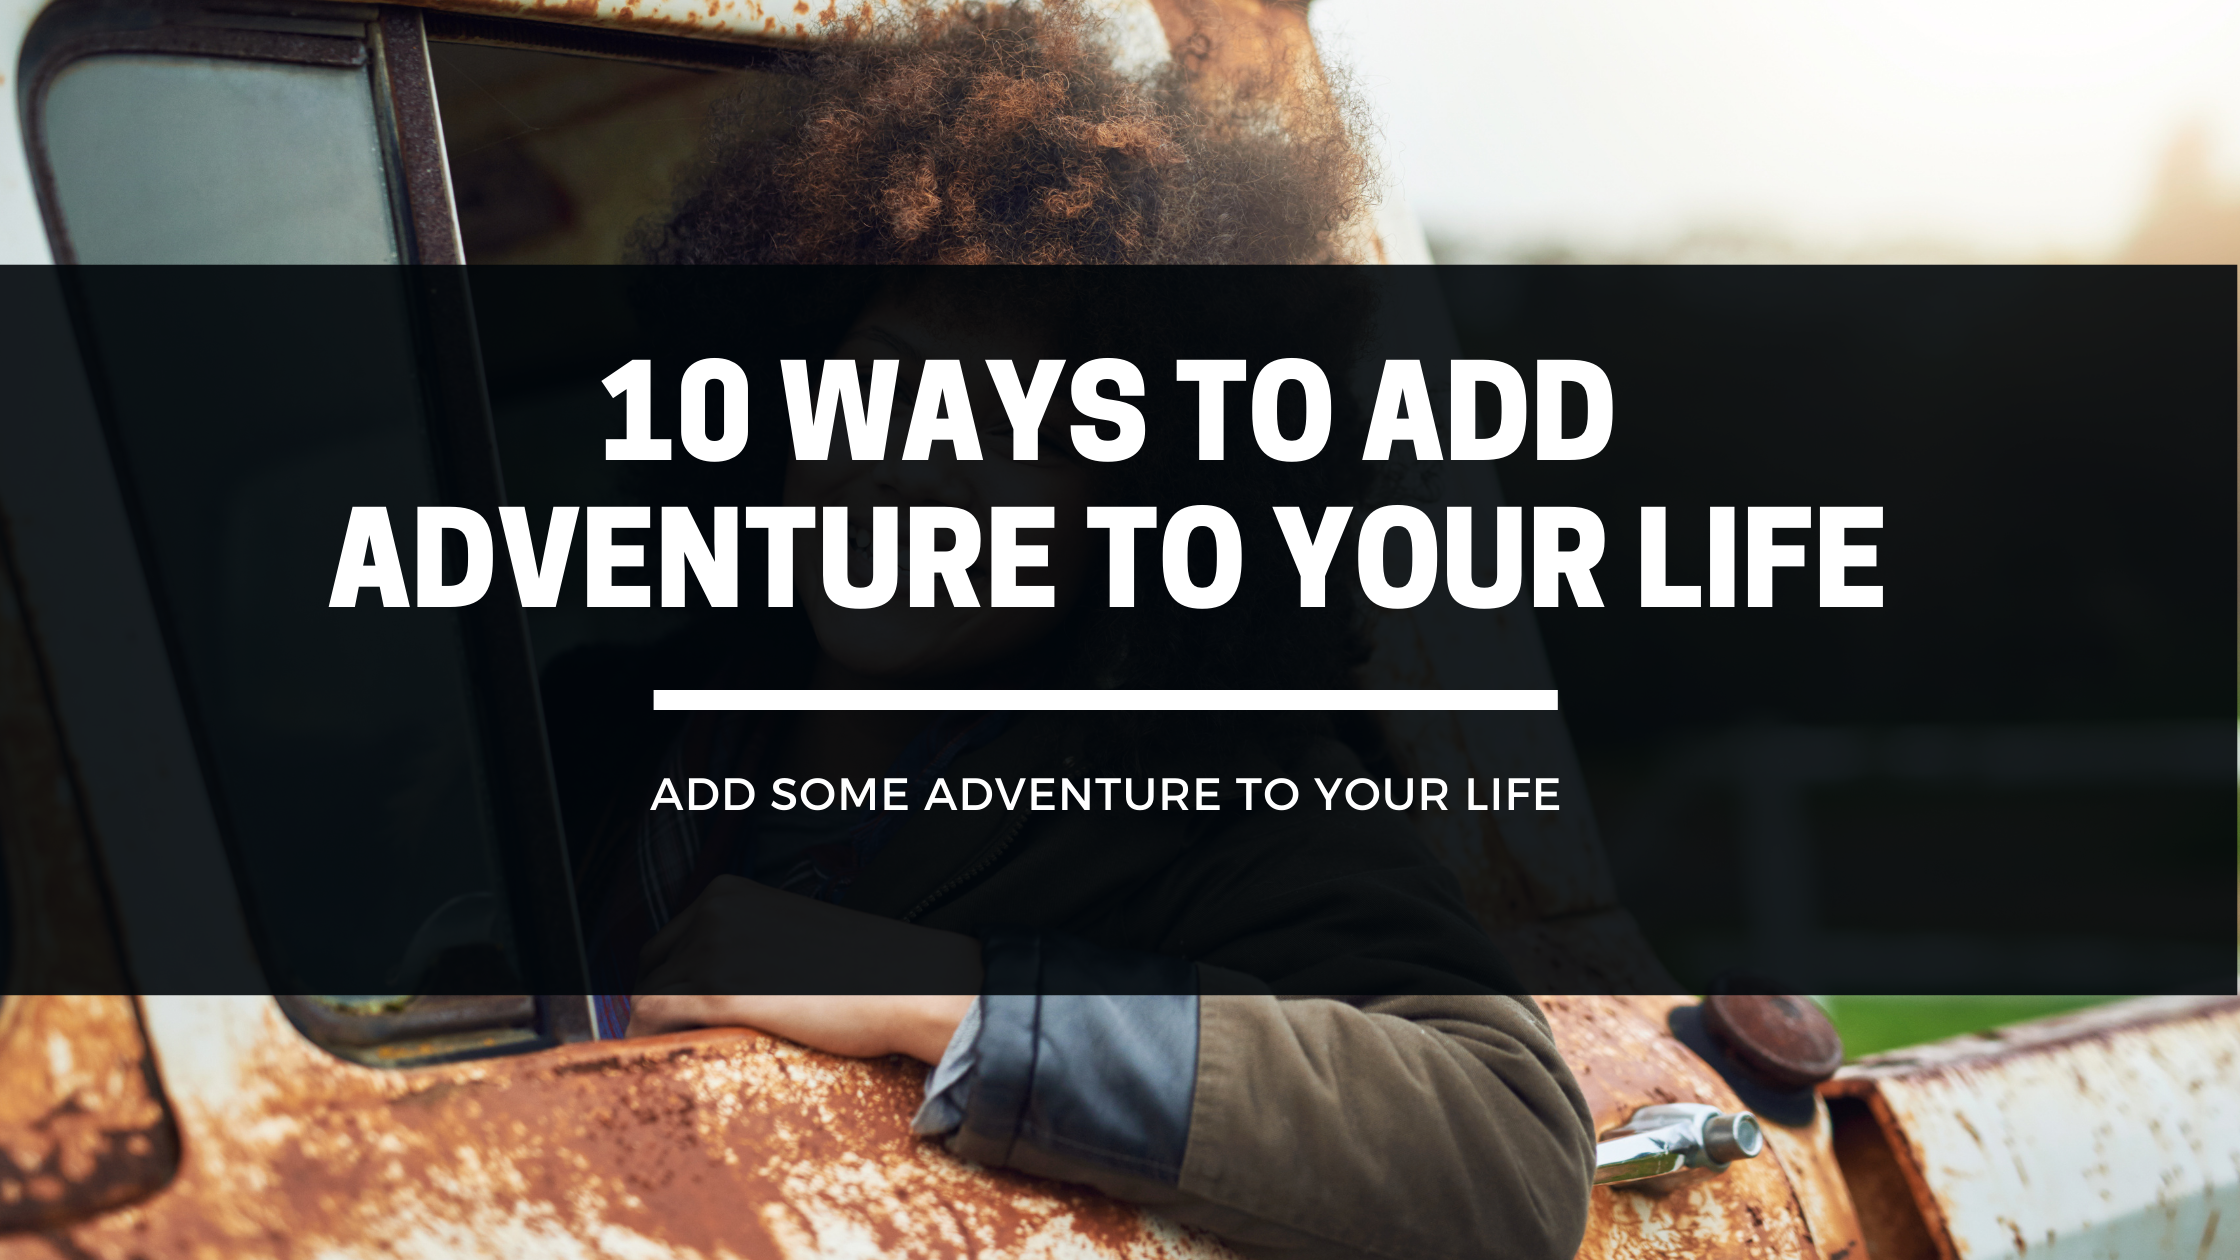 10 Ways To Add Adventure To Your Life